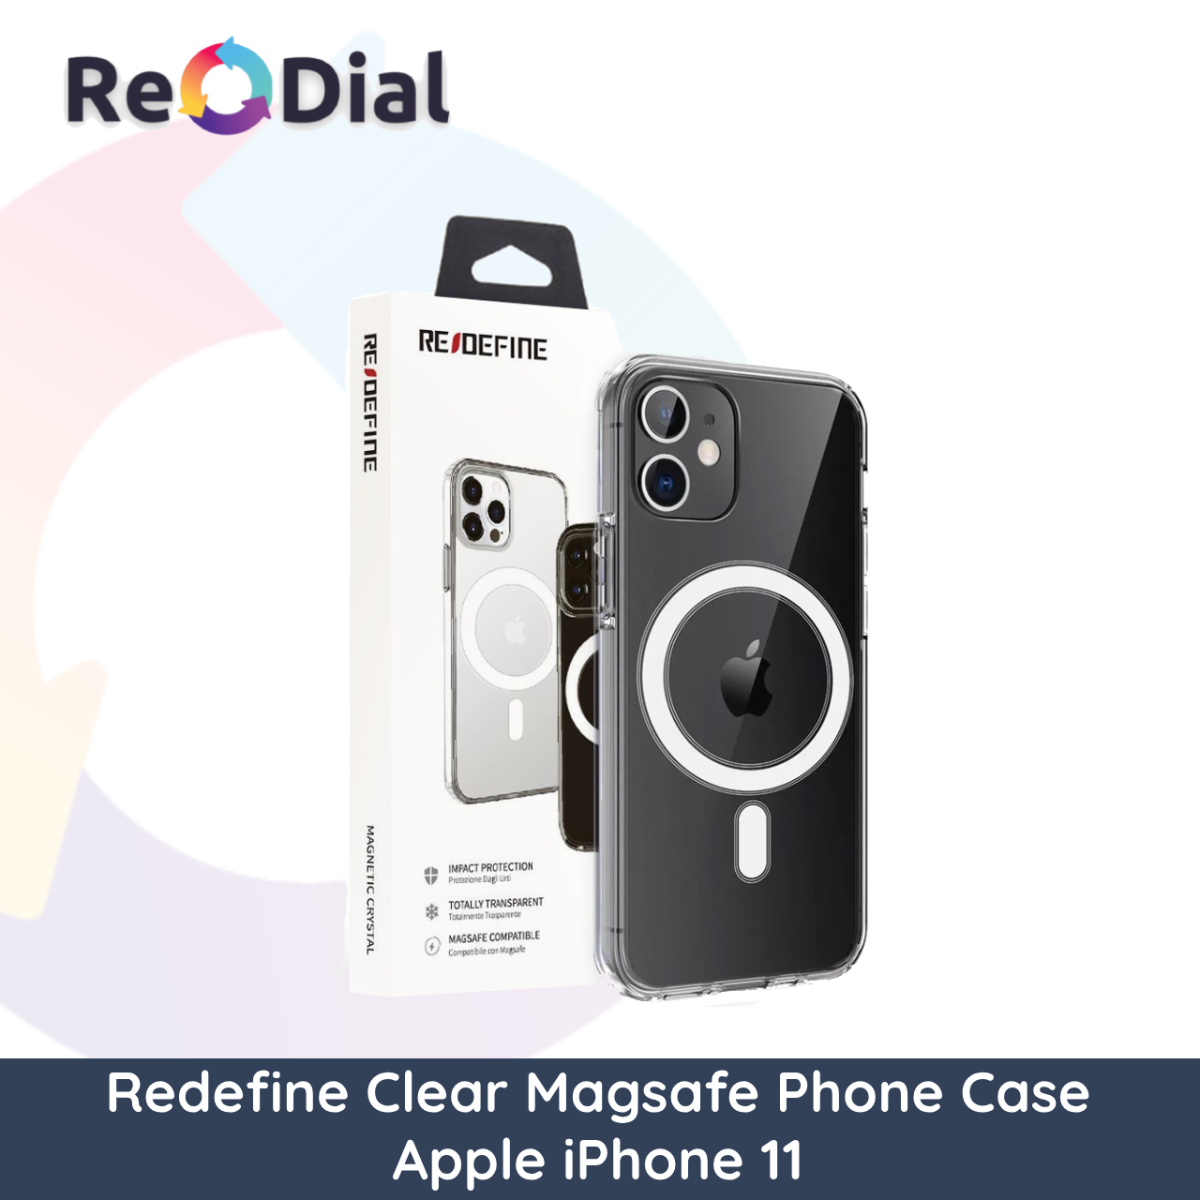 Redefine Clear Magsafe Phone Case For Apple iPhone 11